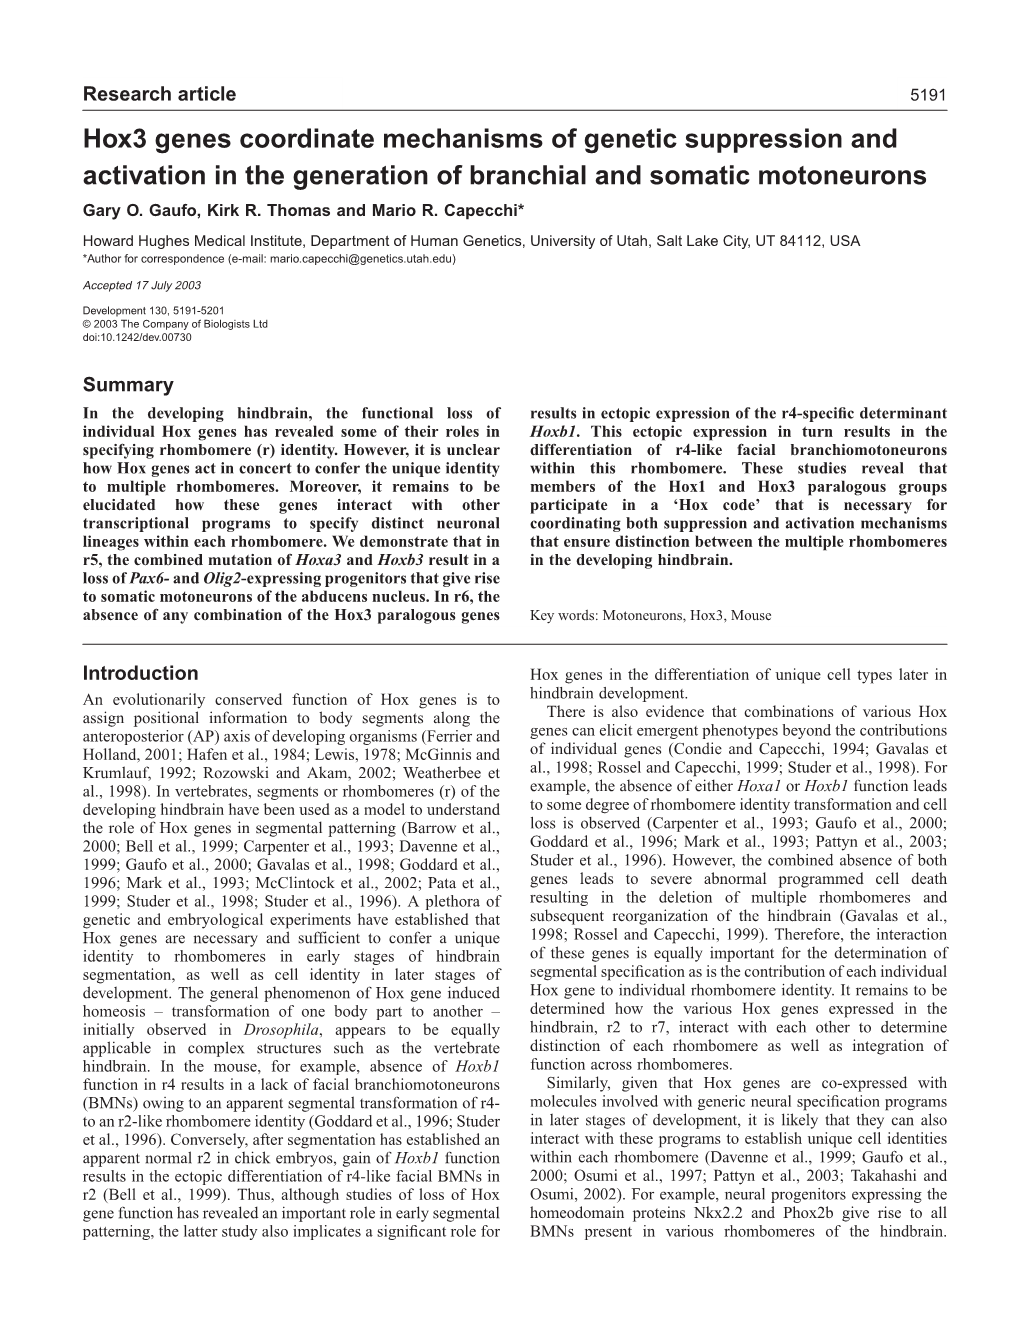 Hox3 Genes Coordinate Mechanisms of Genetic Suppression and Activation in the Generation of Branchial and Somatic Motoneurons Gary O